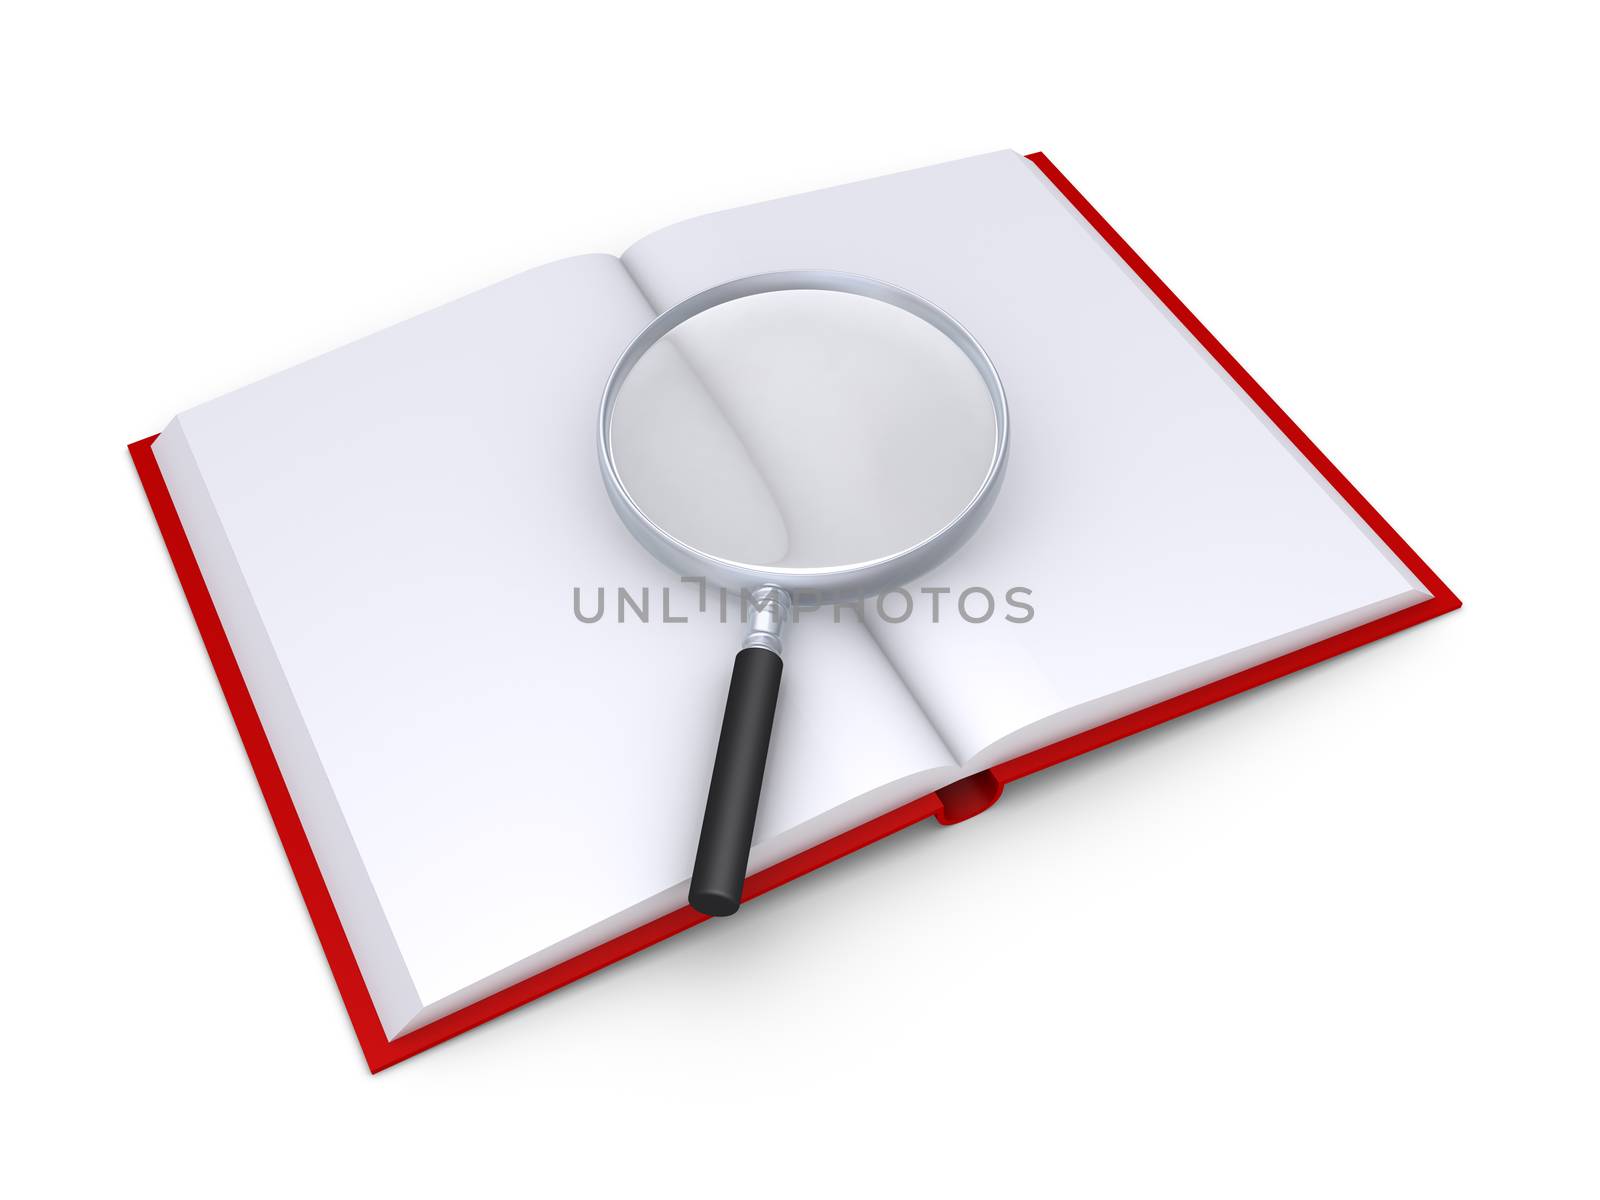 A magnifier is on top of an opened book by 6kor3dos